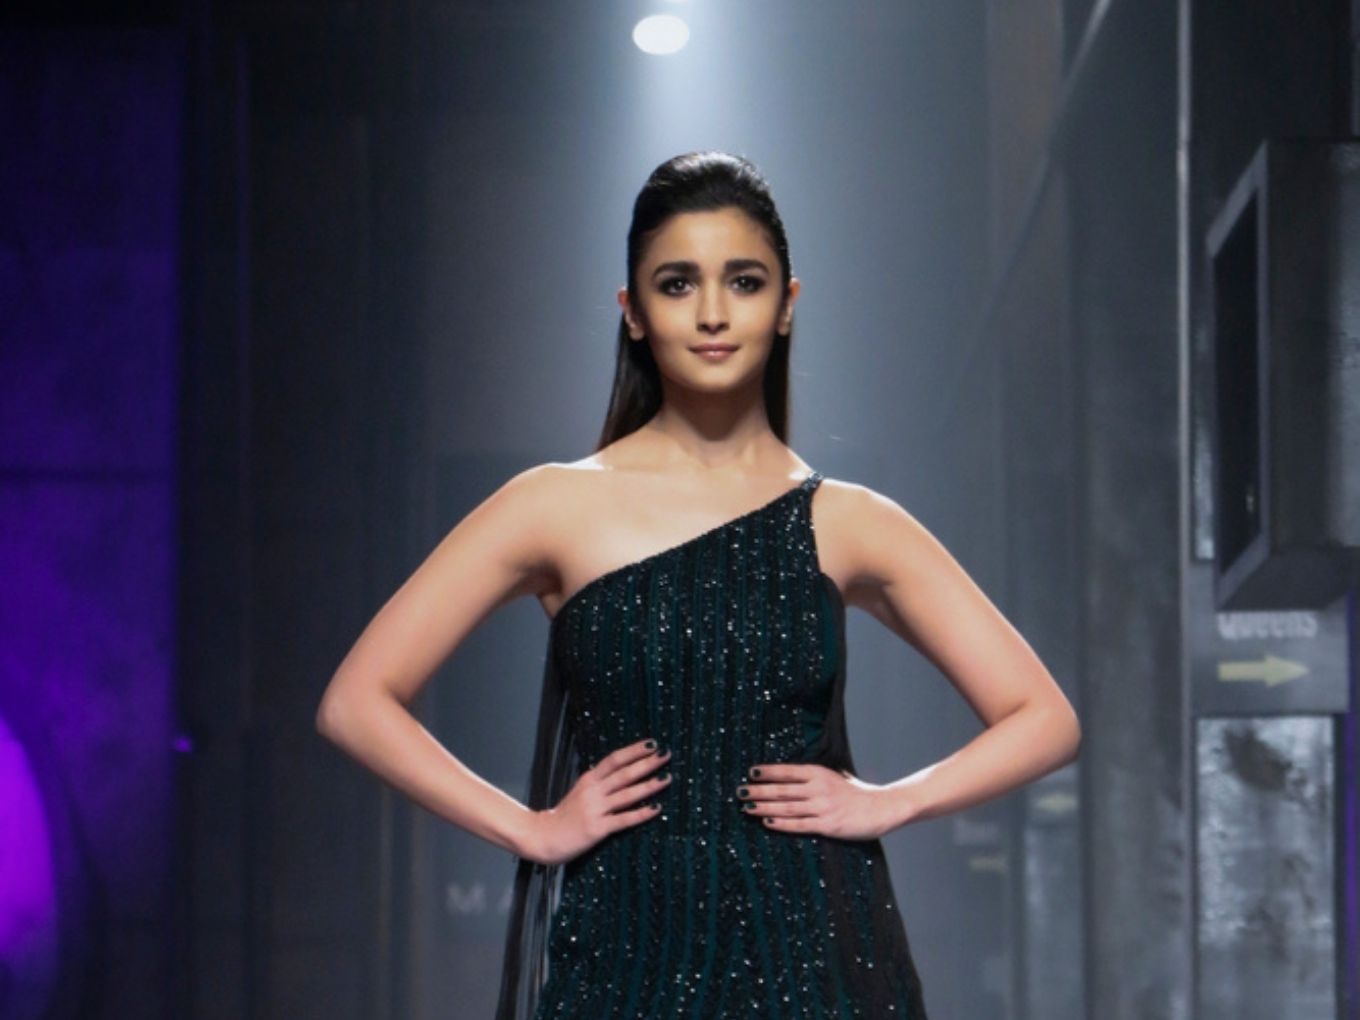 After Bollywood actor Katrina Kaif, Alia Bhatt has invested an undisclosed amount in beauty and ecommerce brand Nykaa.